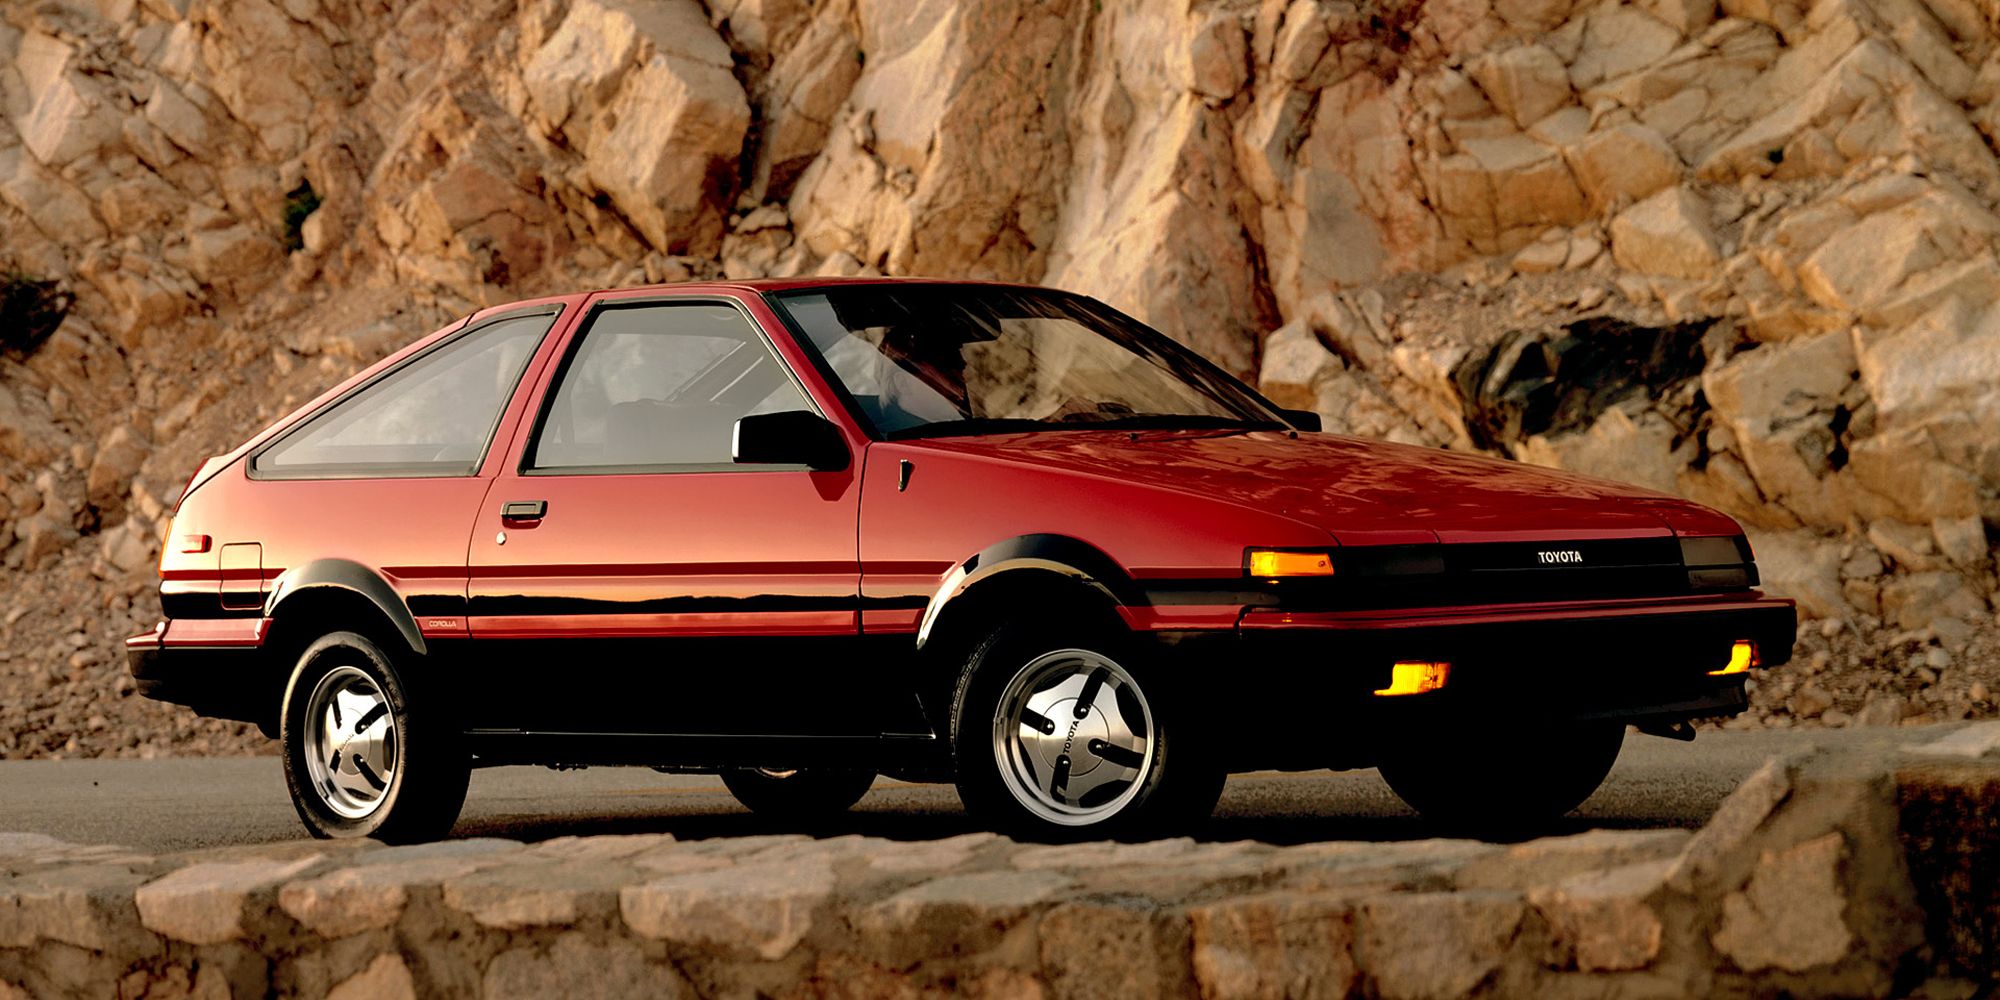 Front 3/4 view of the AE86 in red